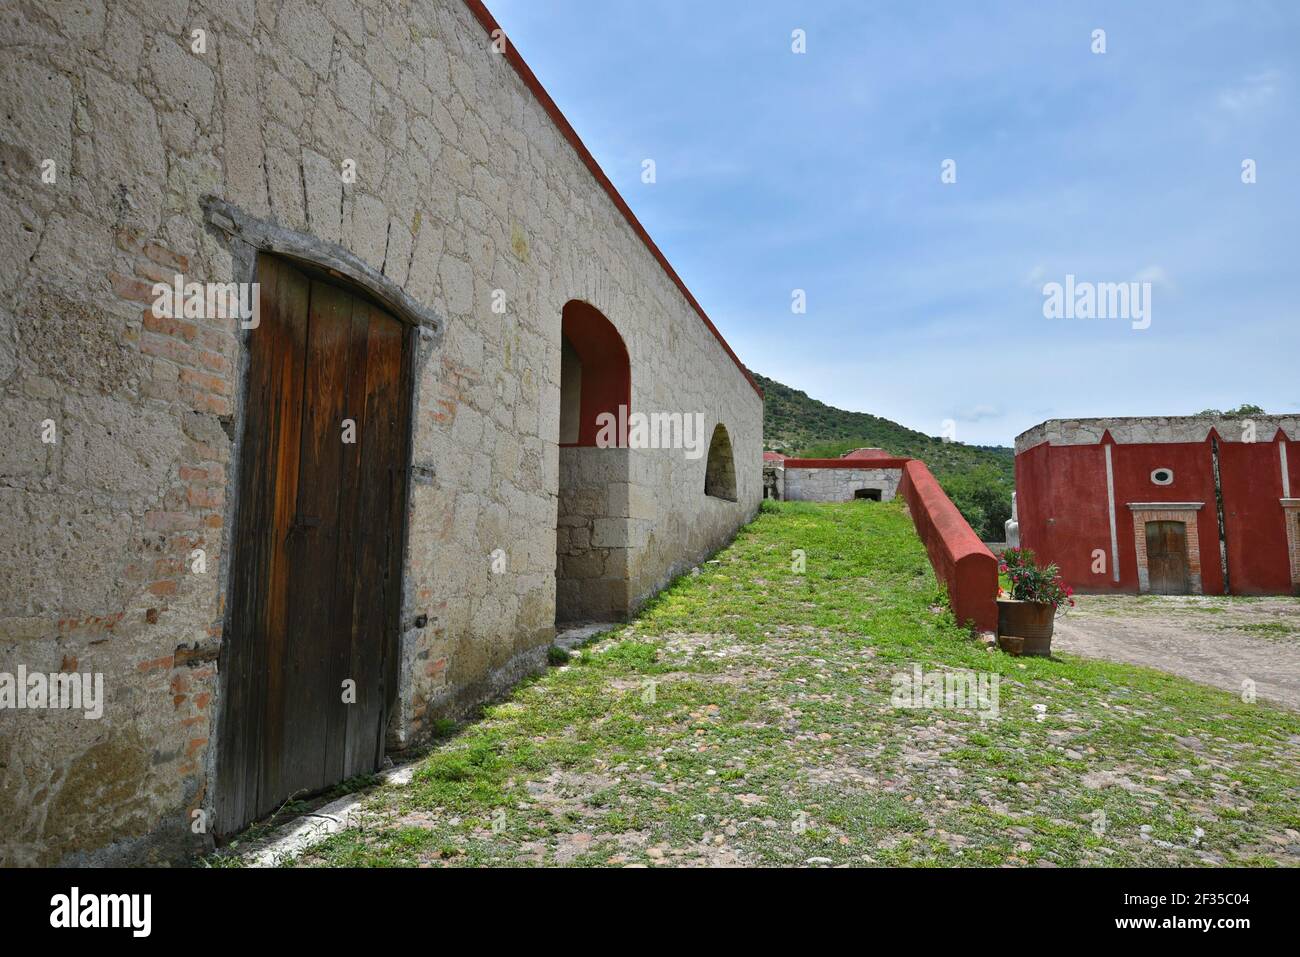 Landscape with abandoned Colonial buildings on the grounds of the ex-hacienda Carranco in San Luis Potosí Mexico. Stock Photo